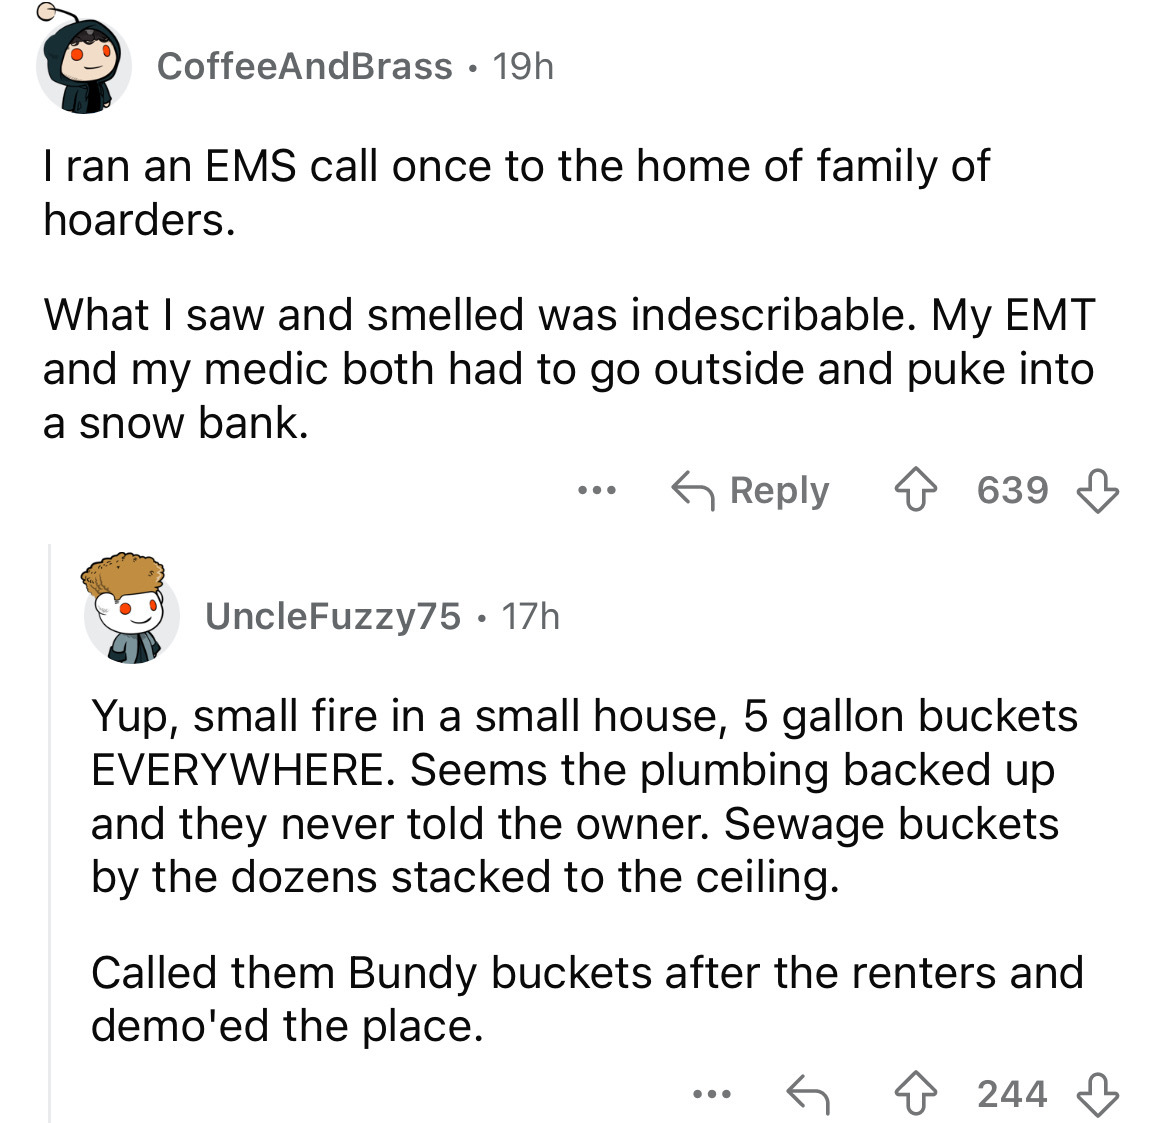 screenshot - CoffeeAndBrass 19h I ran an Ems call once to the home of family of hoarders. What I saw and smelled was indescribable. My Emt and my medic both had to go outside and puke into a snow bank. UncleFuzzy75 17h . 639 Yup, small fire in a small hou